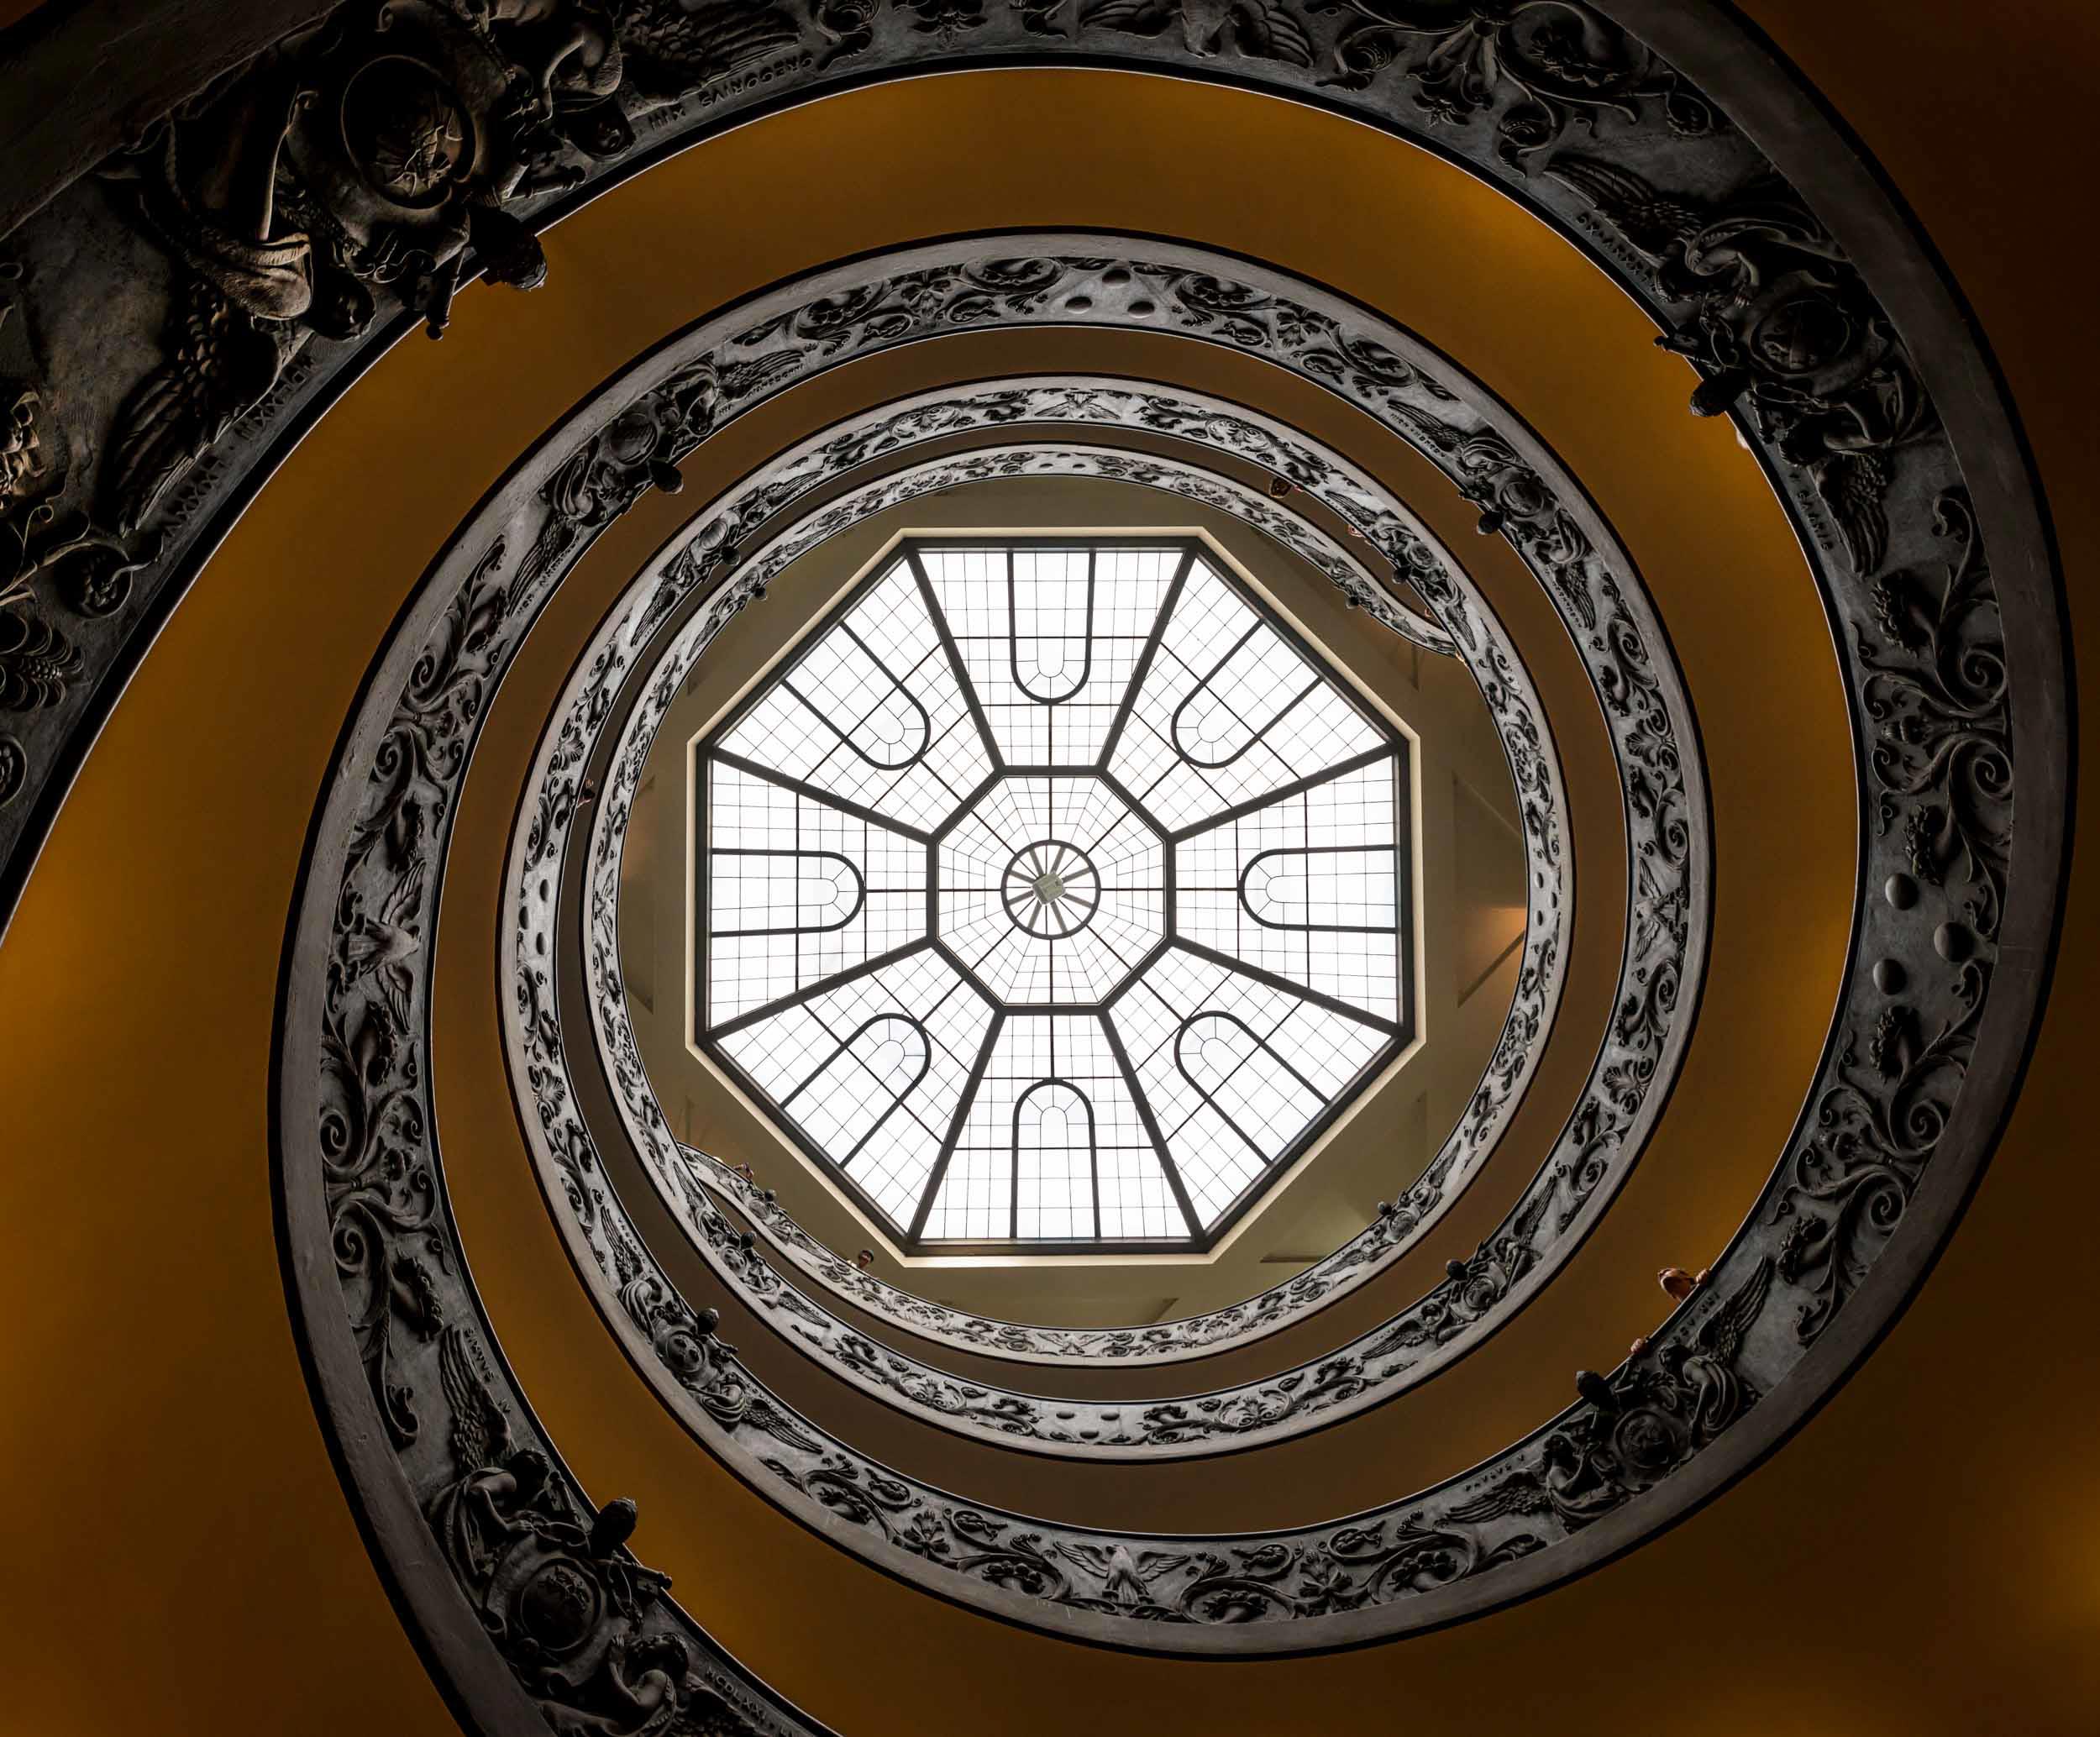 vatican-spiral-staircase-architecture-interior-city-italy-travel